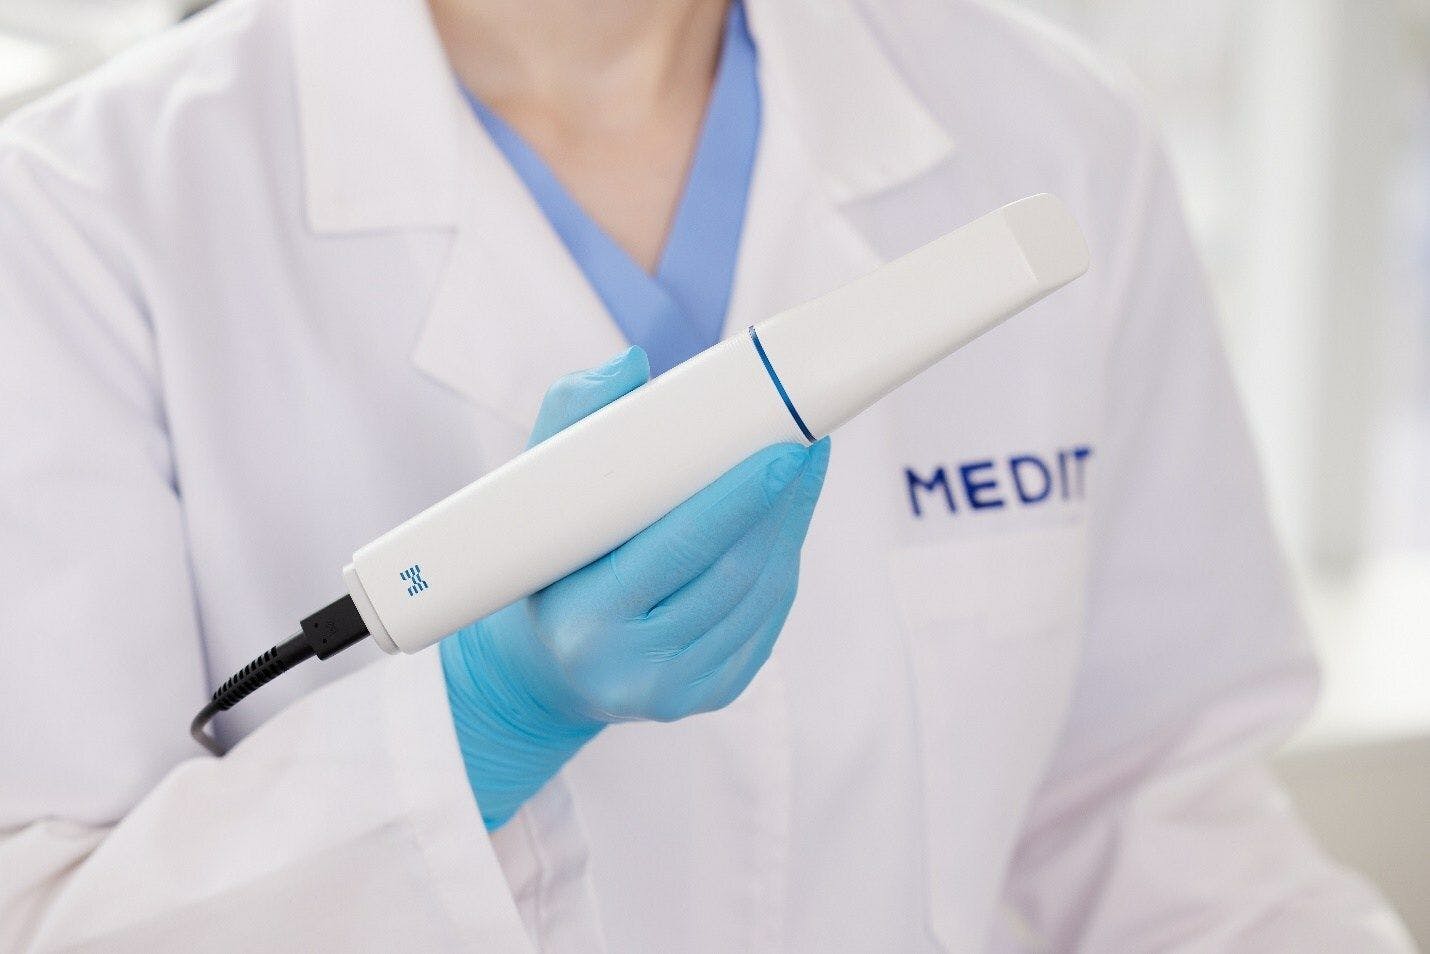 Medit Officially Launches New i900 Intraoral Scanning System | Image Credit: © Medit